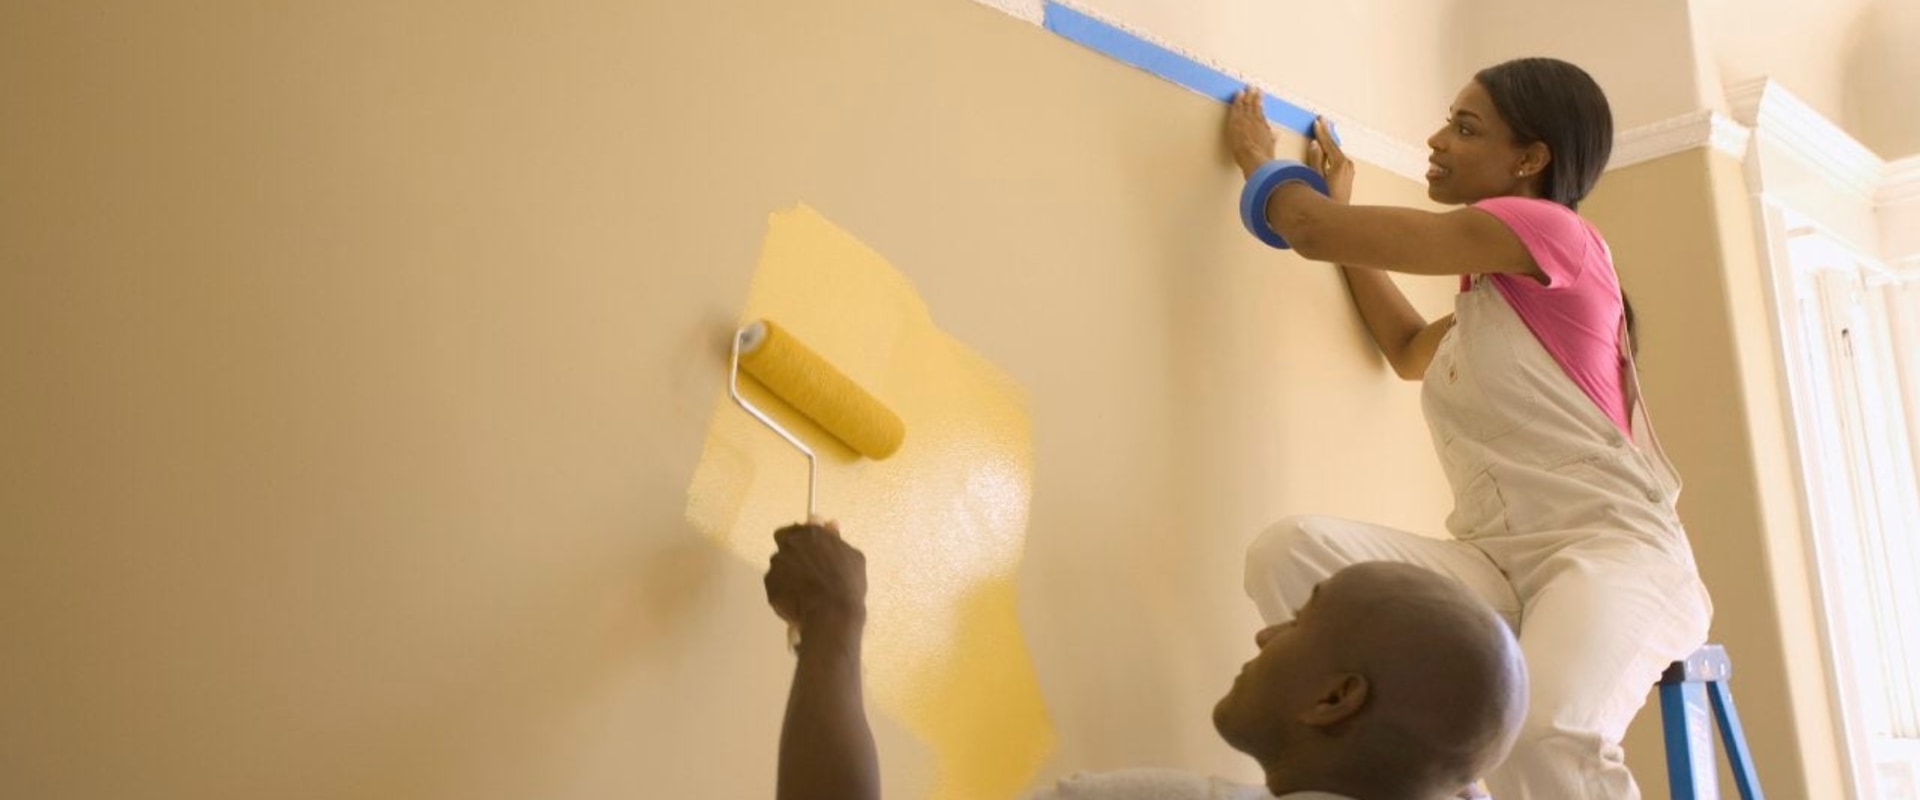 Comparing Painting Services in Your Area